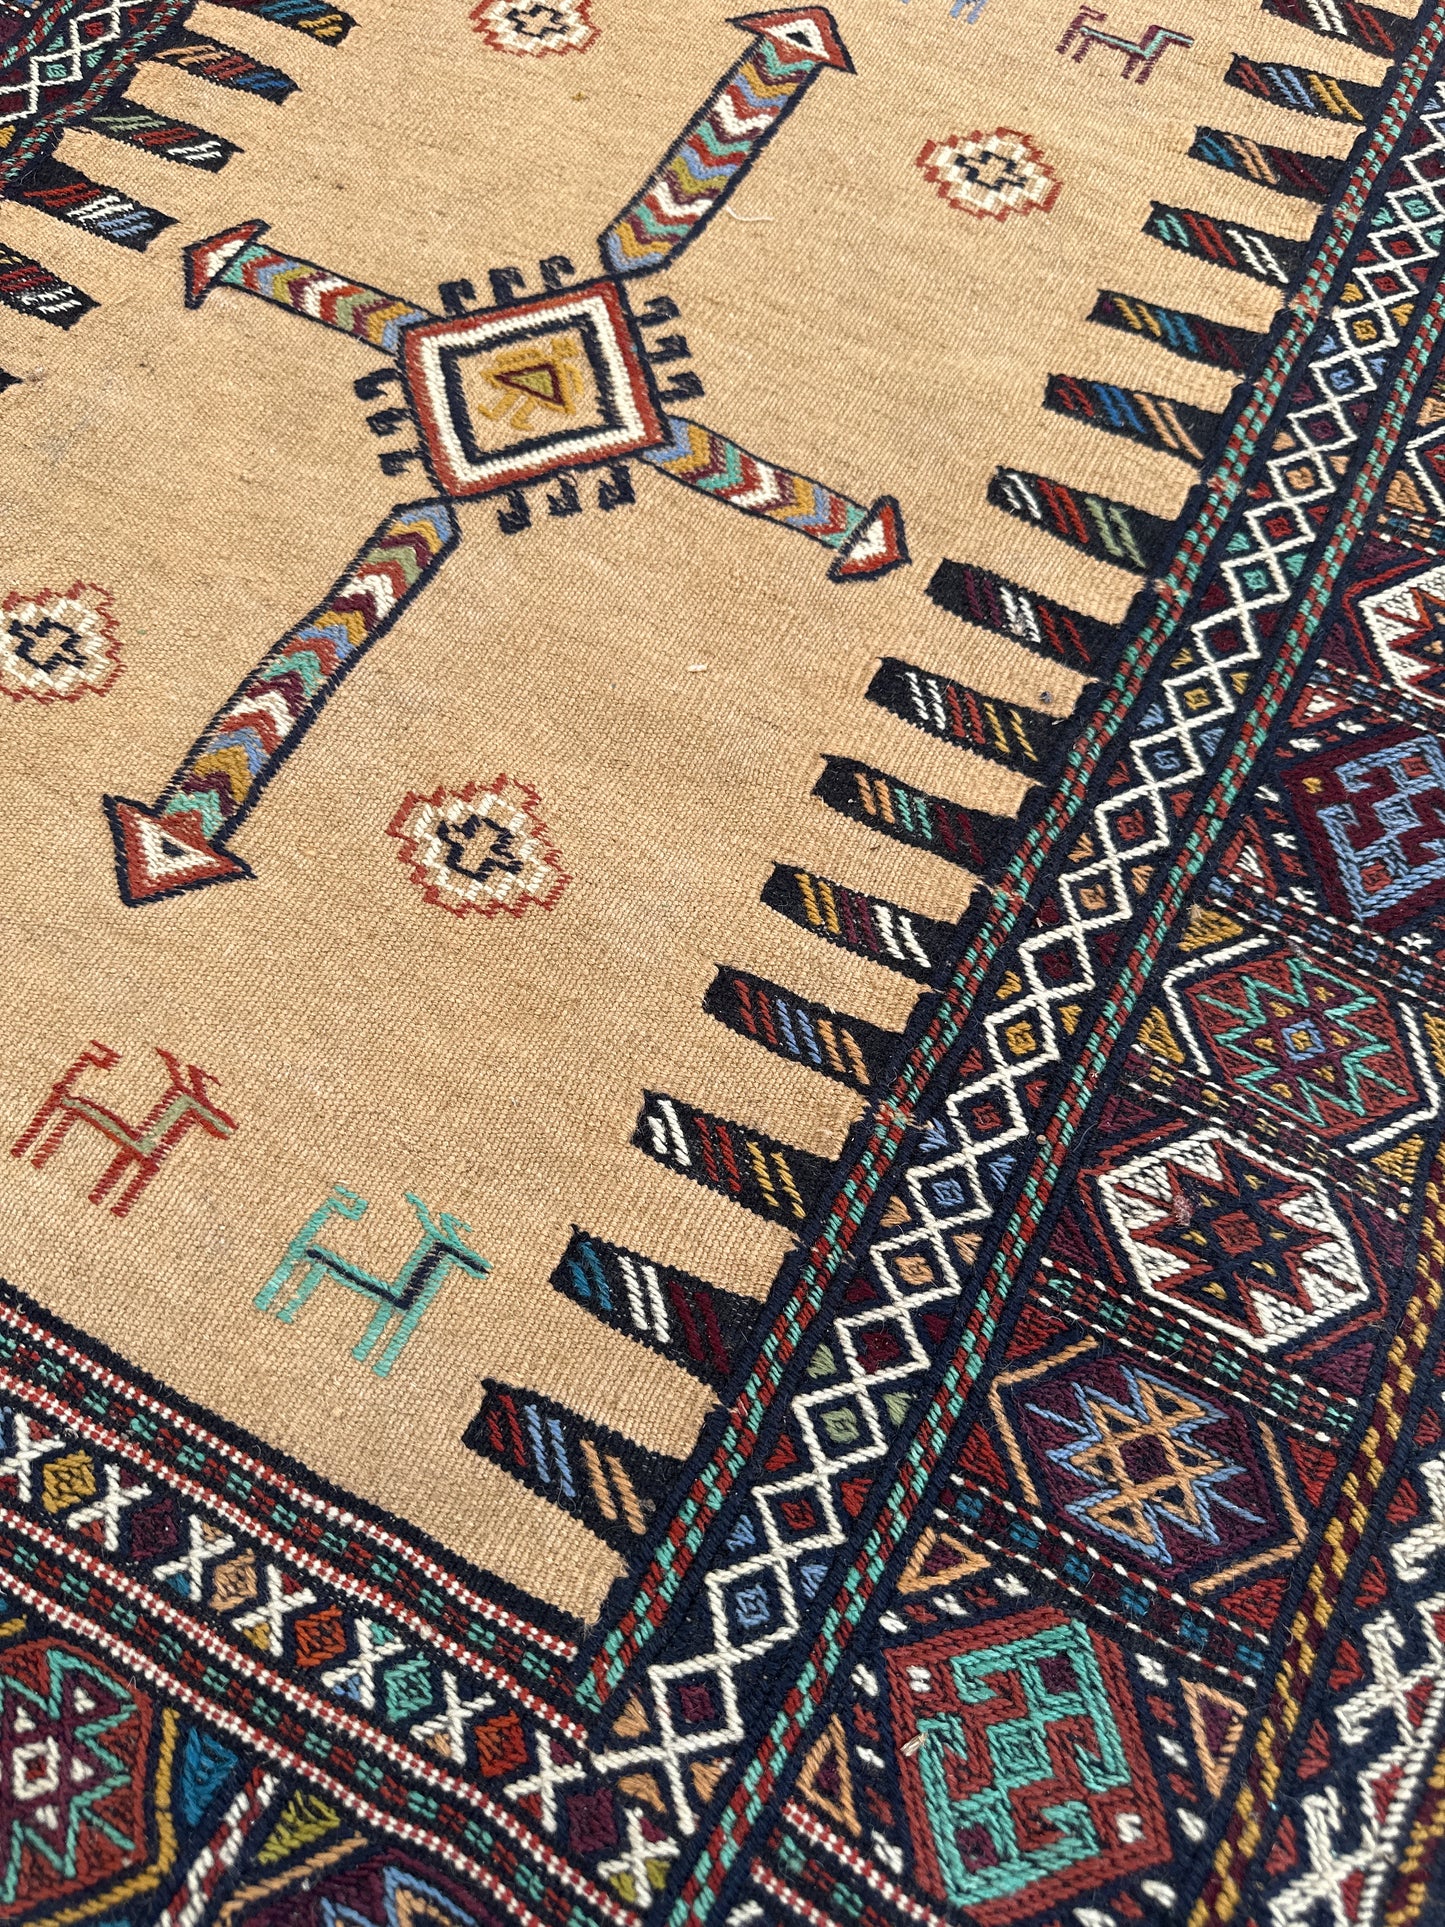 3'x6' Hand-woven Kilim with Soumak Embroidry Baluch Eastern Persian Rug